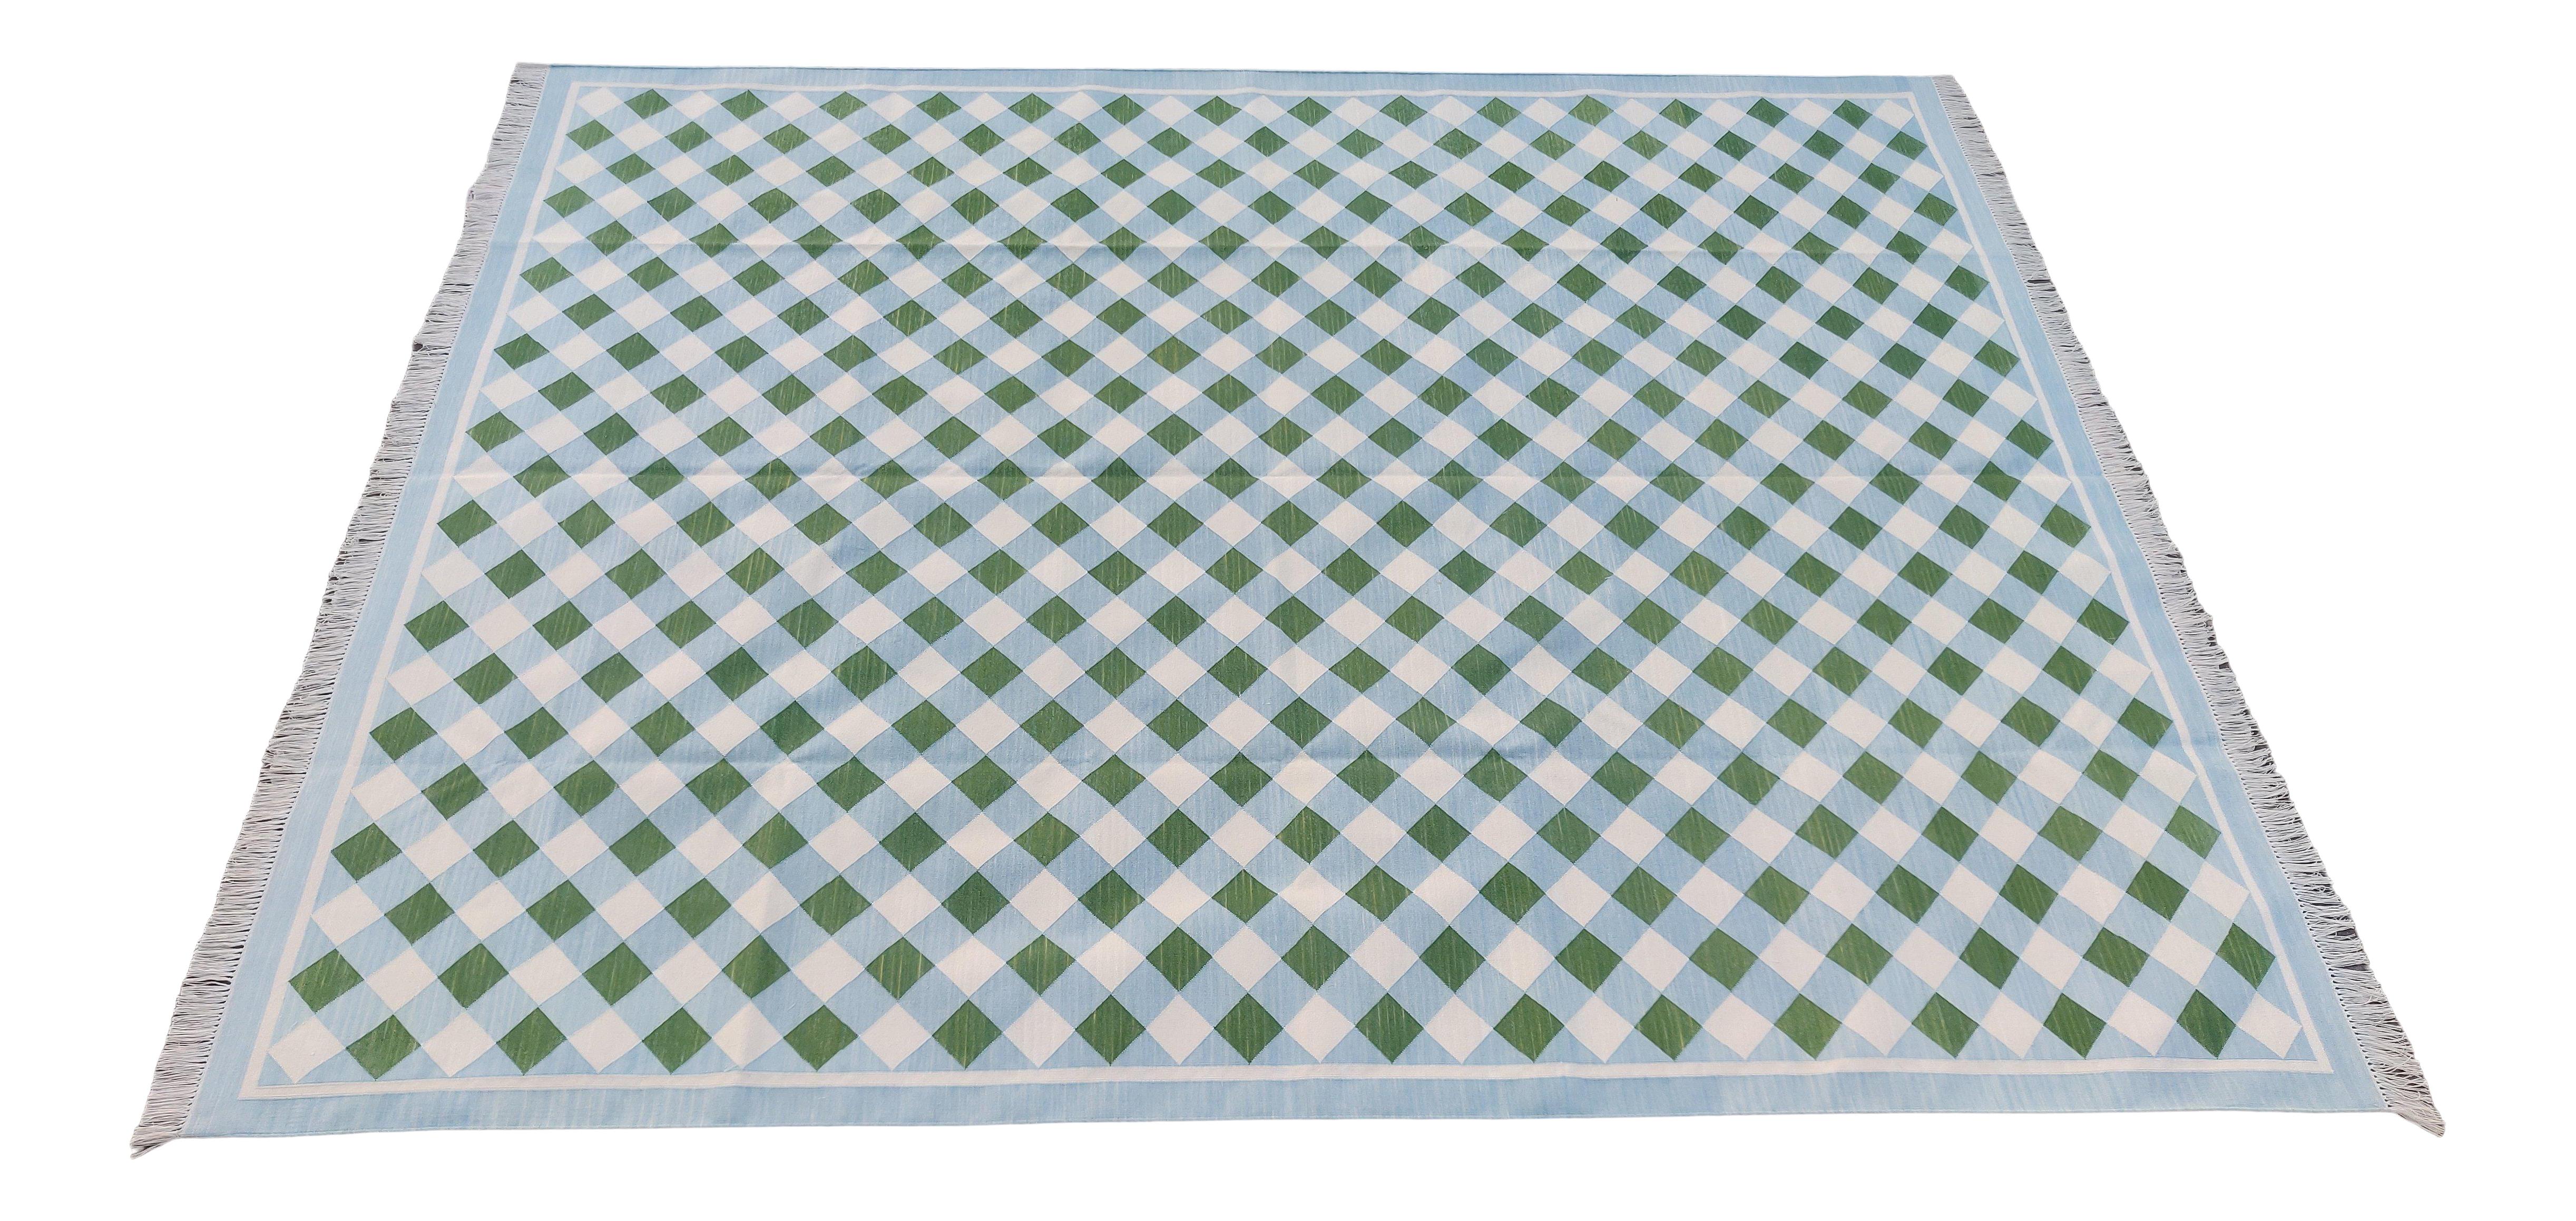 Hand-Woven Handmade Cotton Area Flat Weave Rug, Green And Blue Checked Indian Dhurrie Rug For Sale